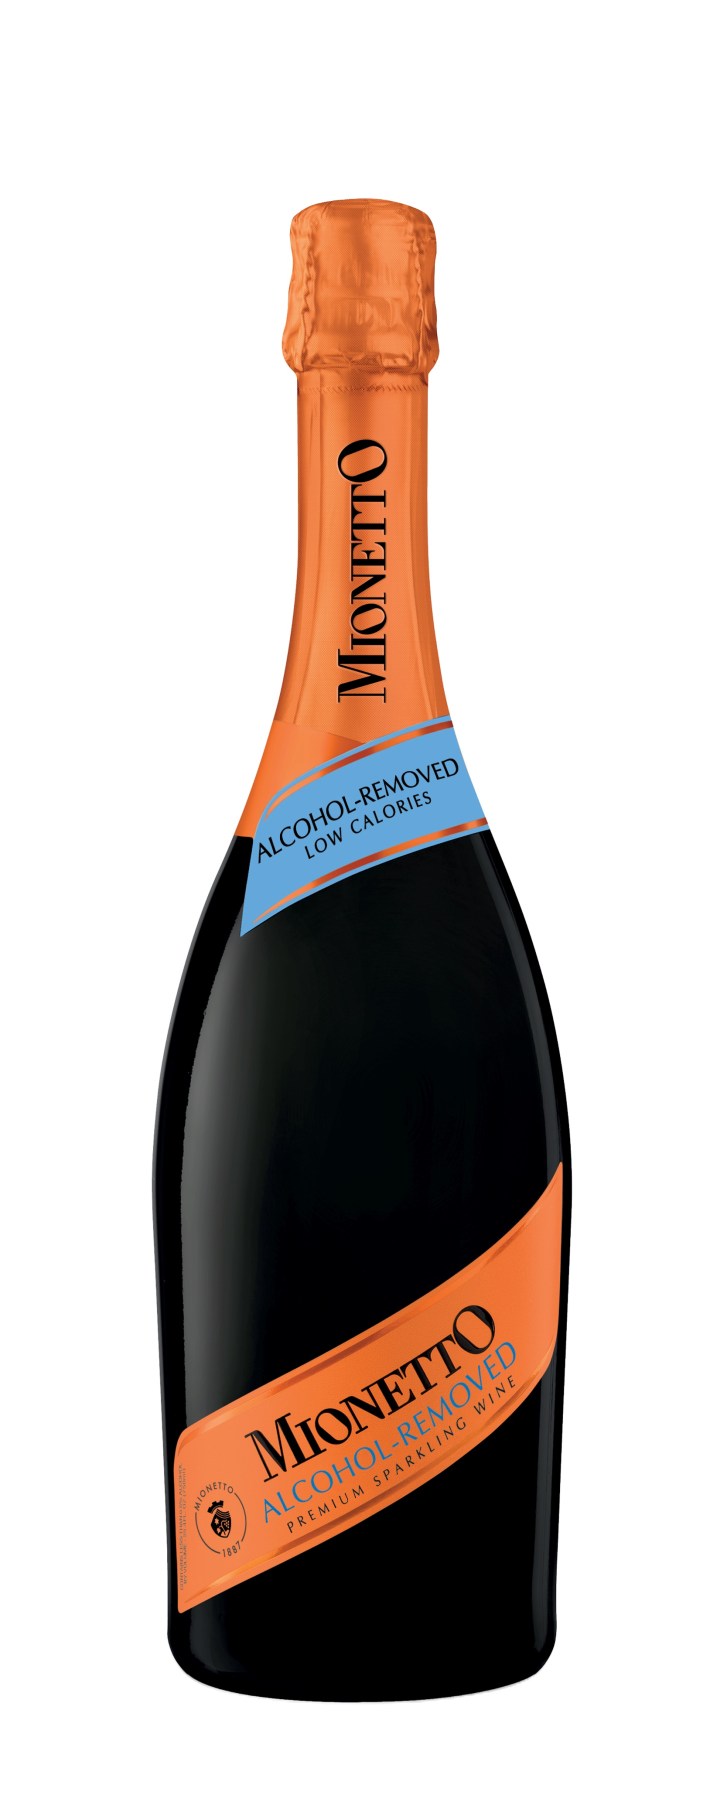 Mionetto alcohol-removed sparkling wine